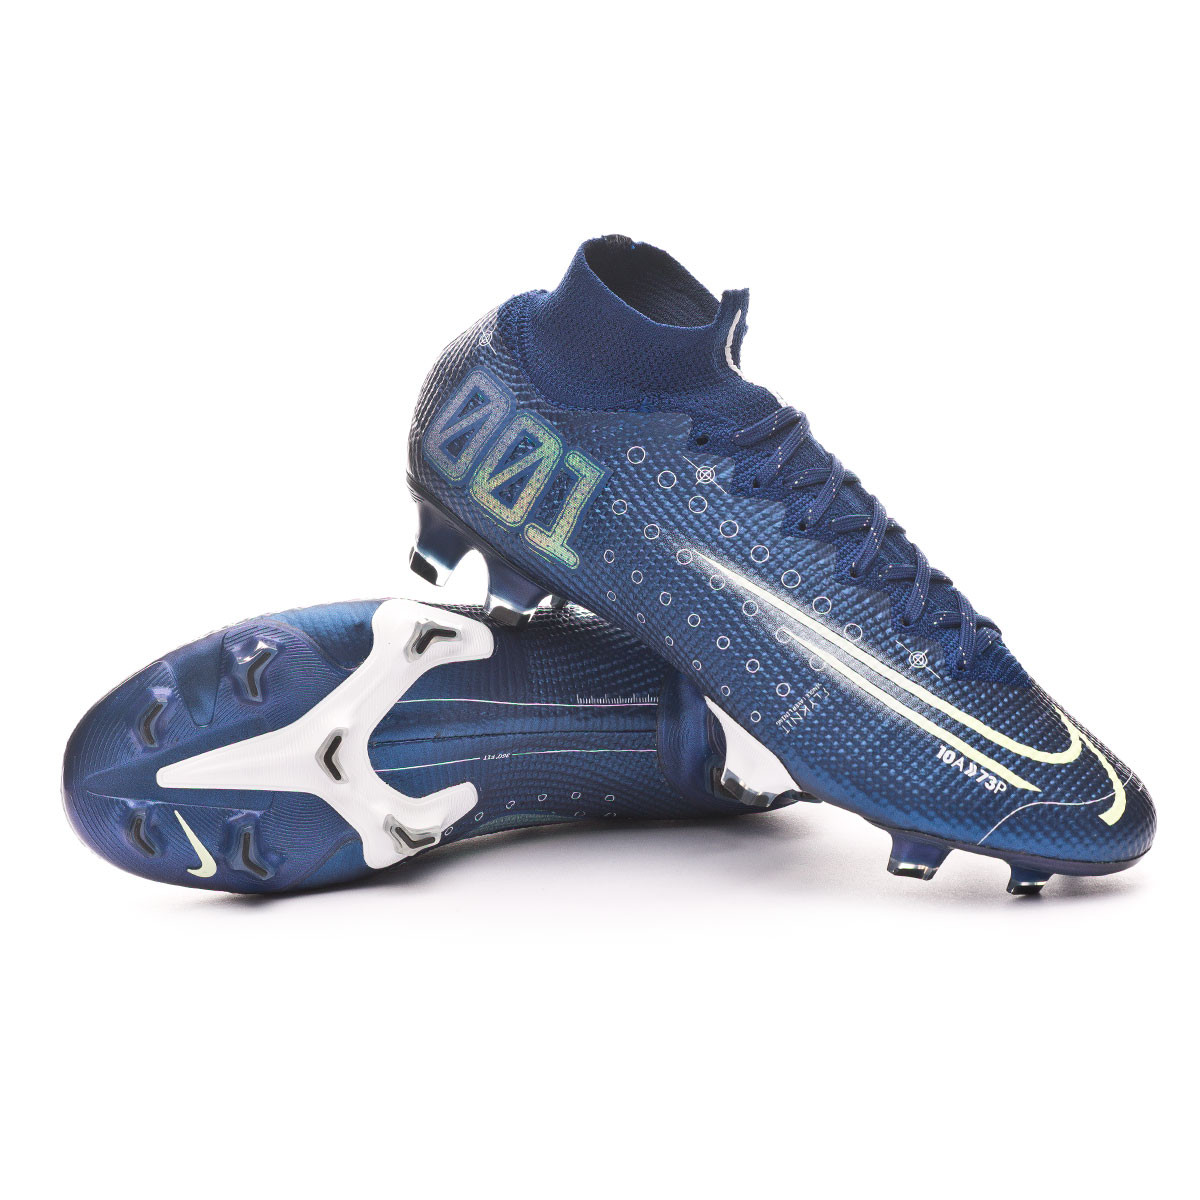 Nike Mercurial Superfly VI Elite LVL UP Football Boots PD